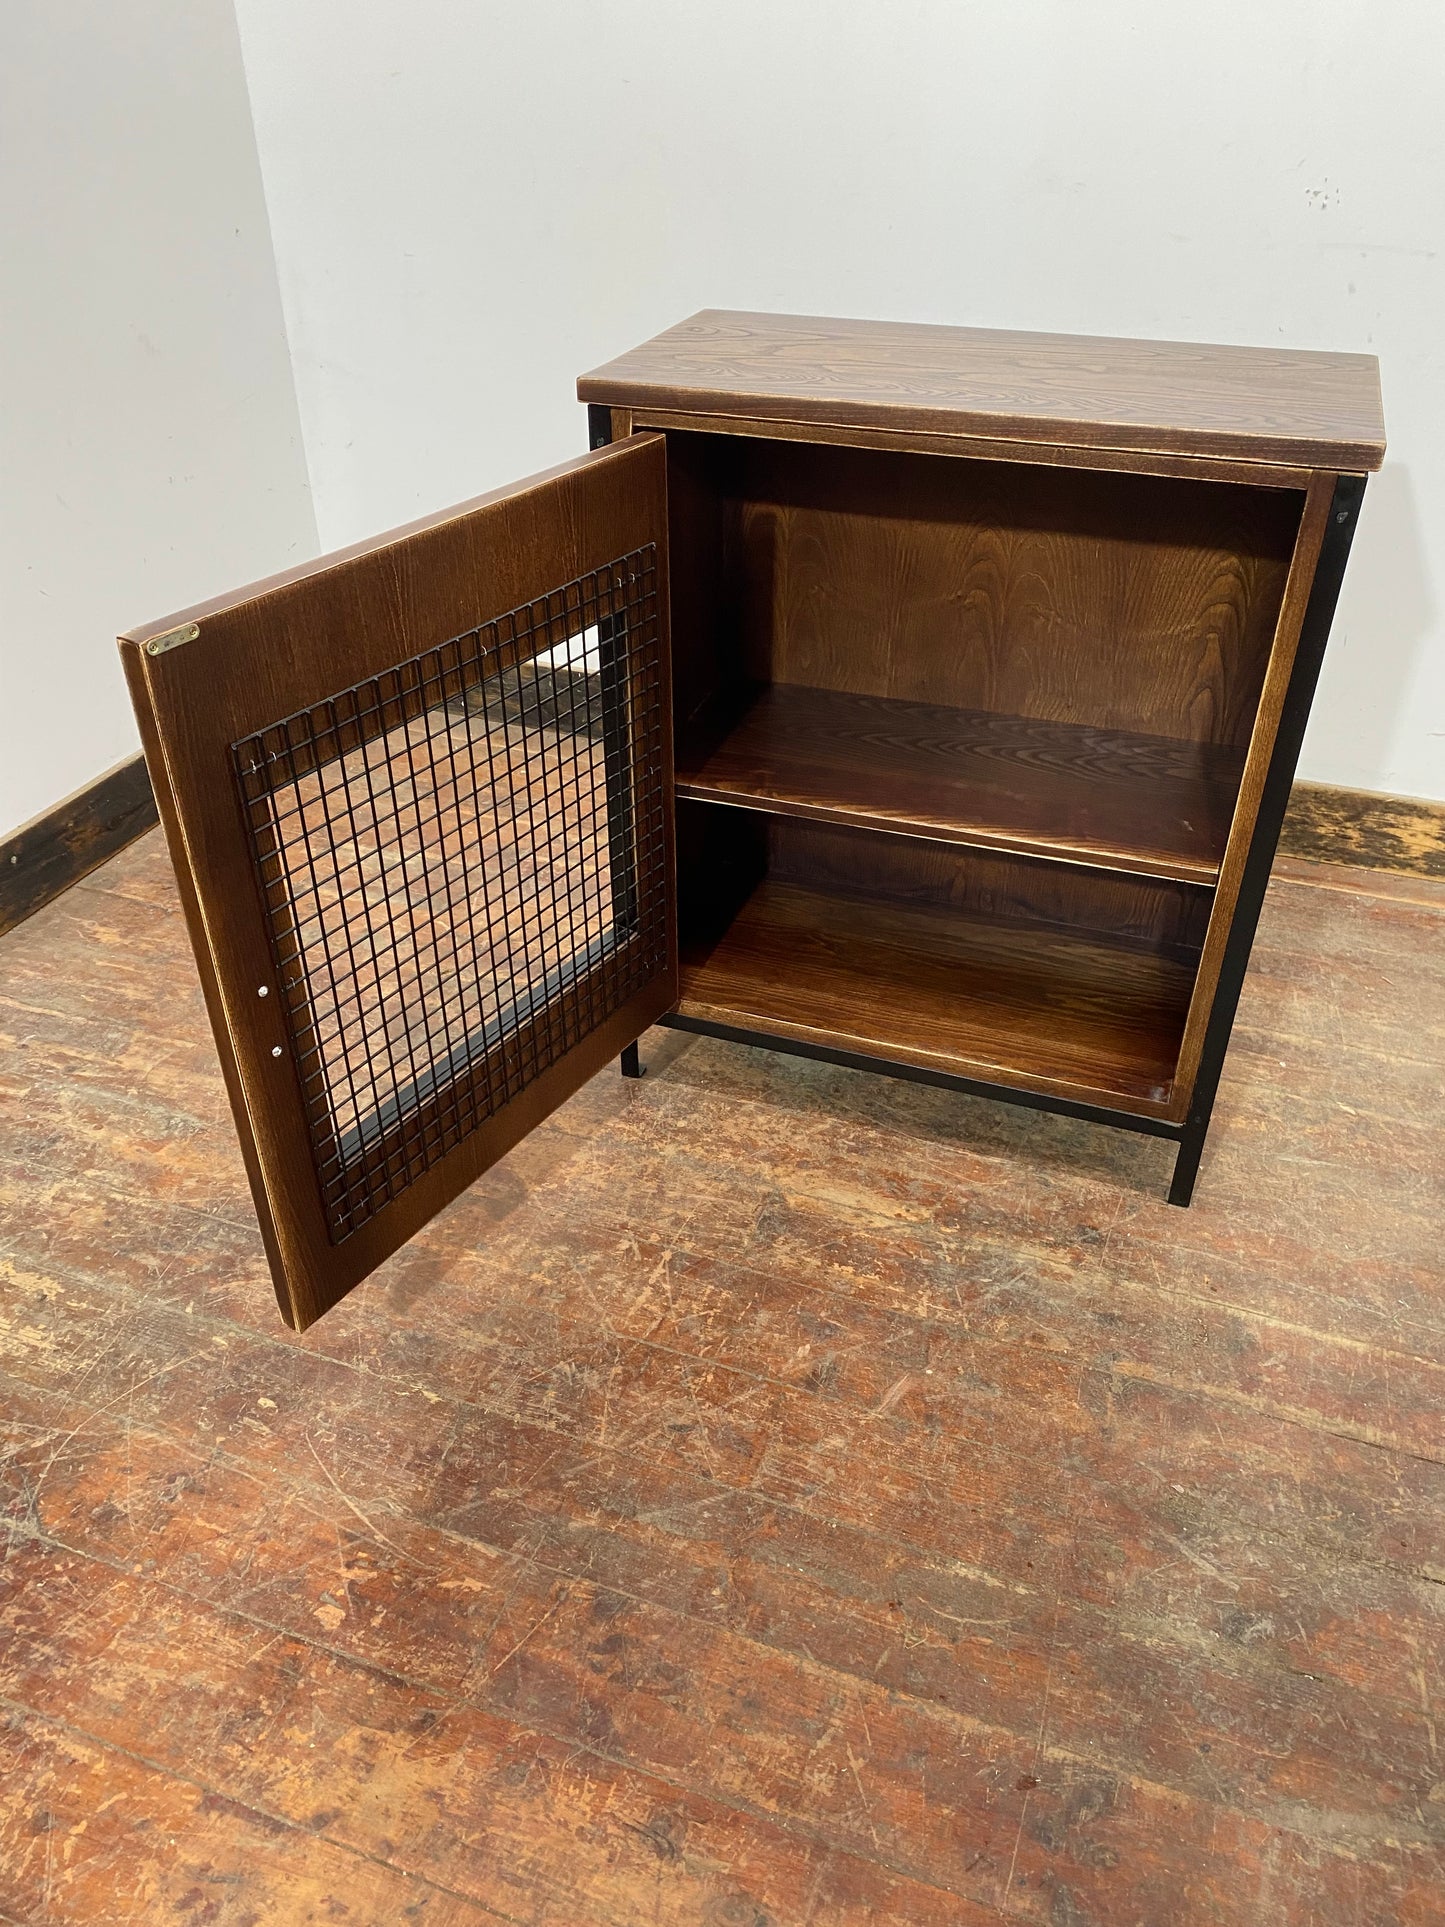 Wood and steel cabinet